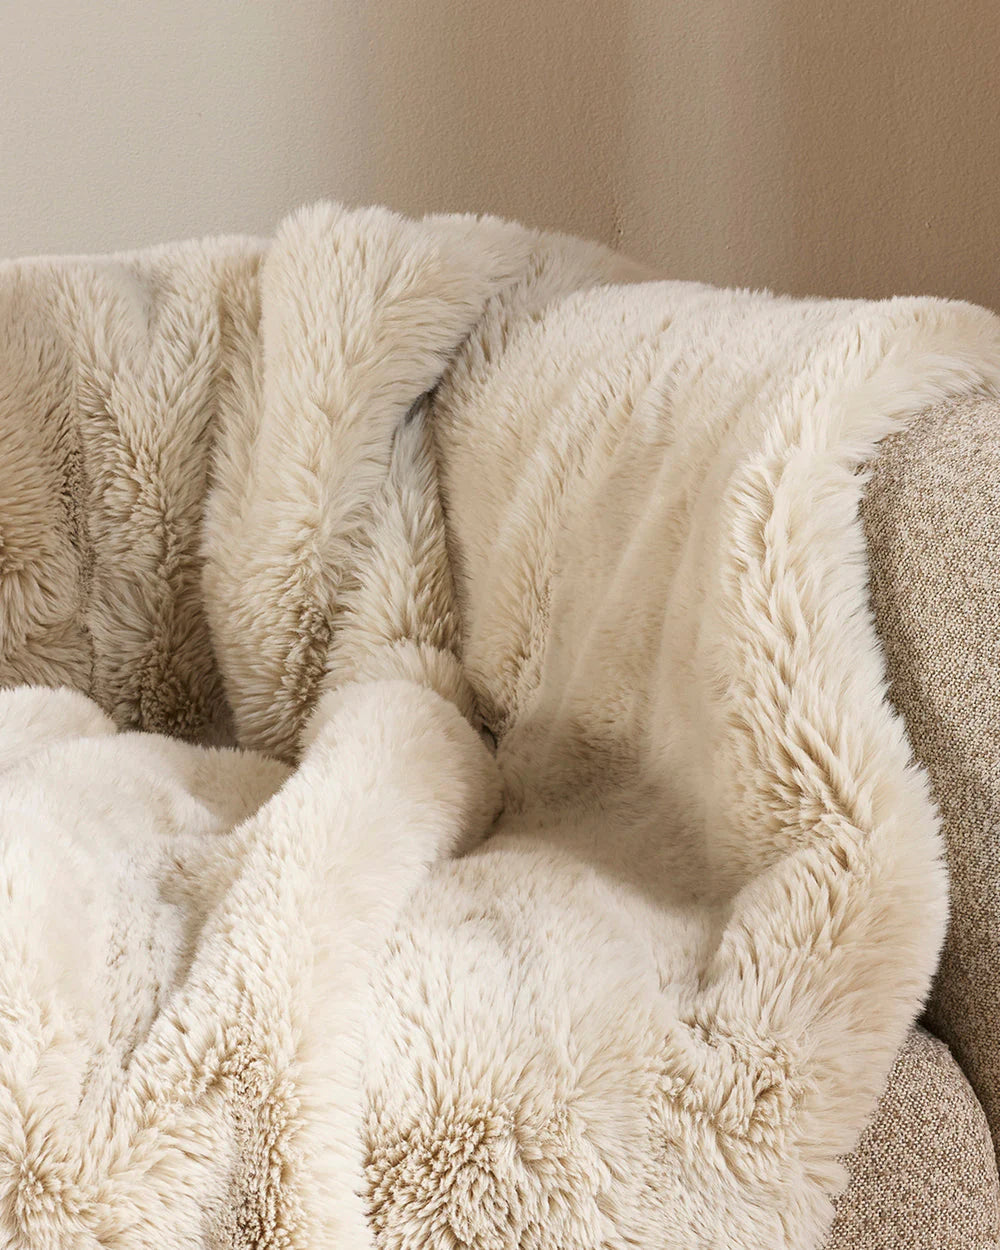 Baya Pele Faux Fur Ecru Throw Rug Blanket is available from Make Your House A Home Premium Stockist. Furniture Store Bendigo, Victoria. Australia Wide Delivery. Furtex.